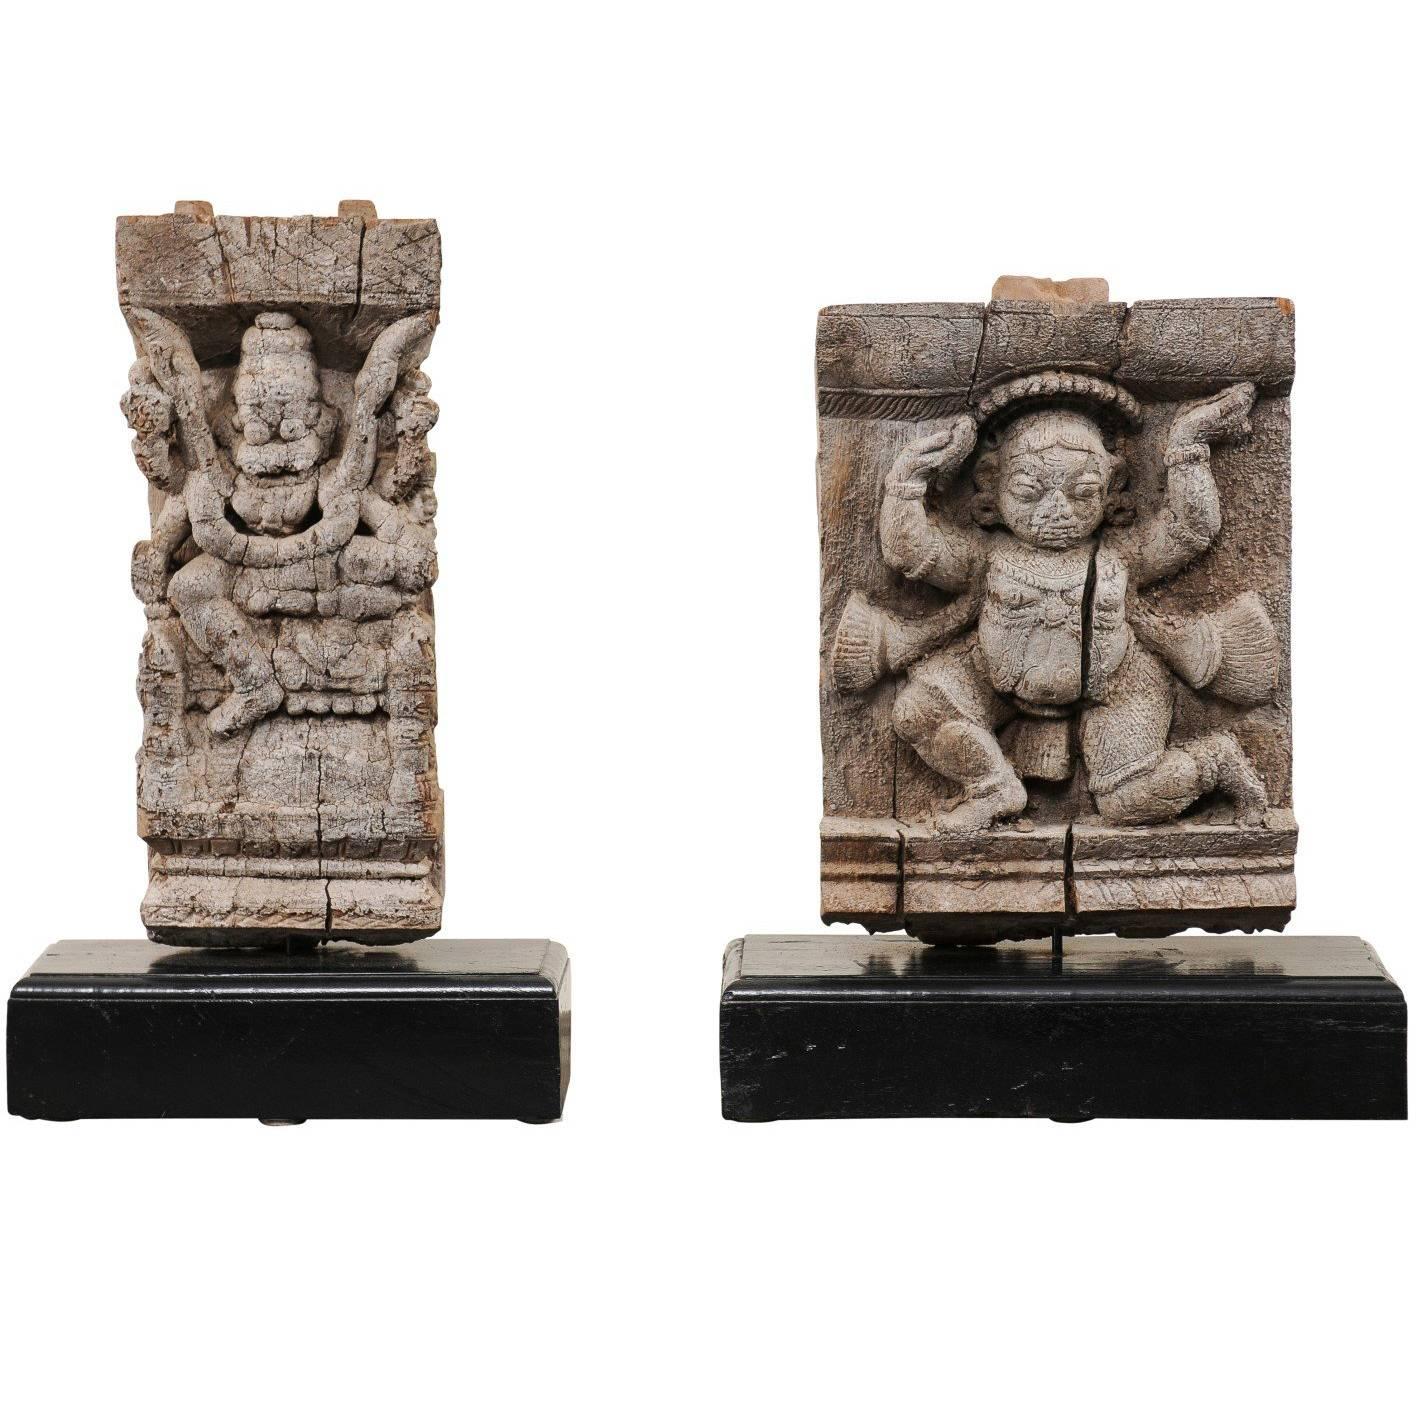 Pair of 19th Century Carved Wood Hindu Temple Fragments from a Temple in India For Sale